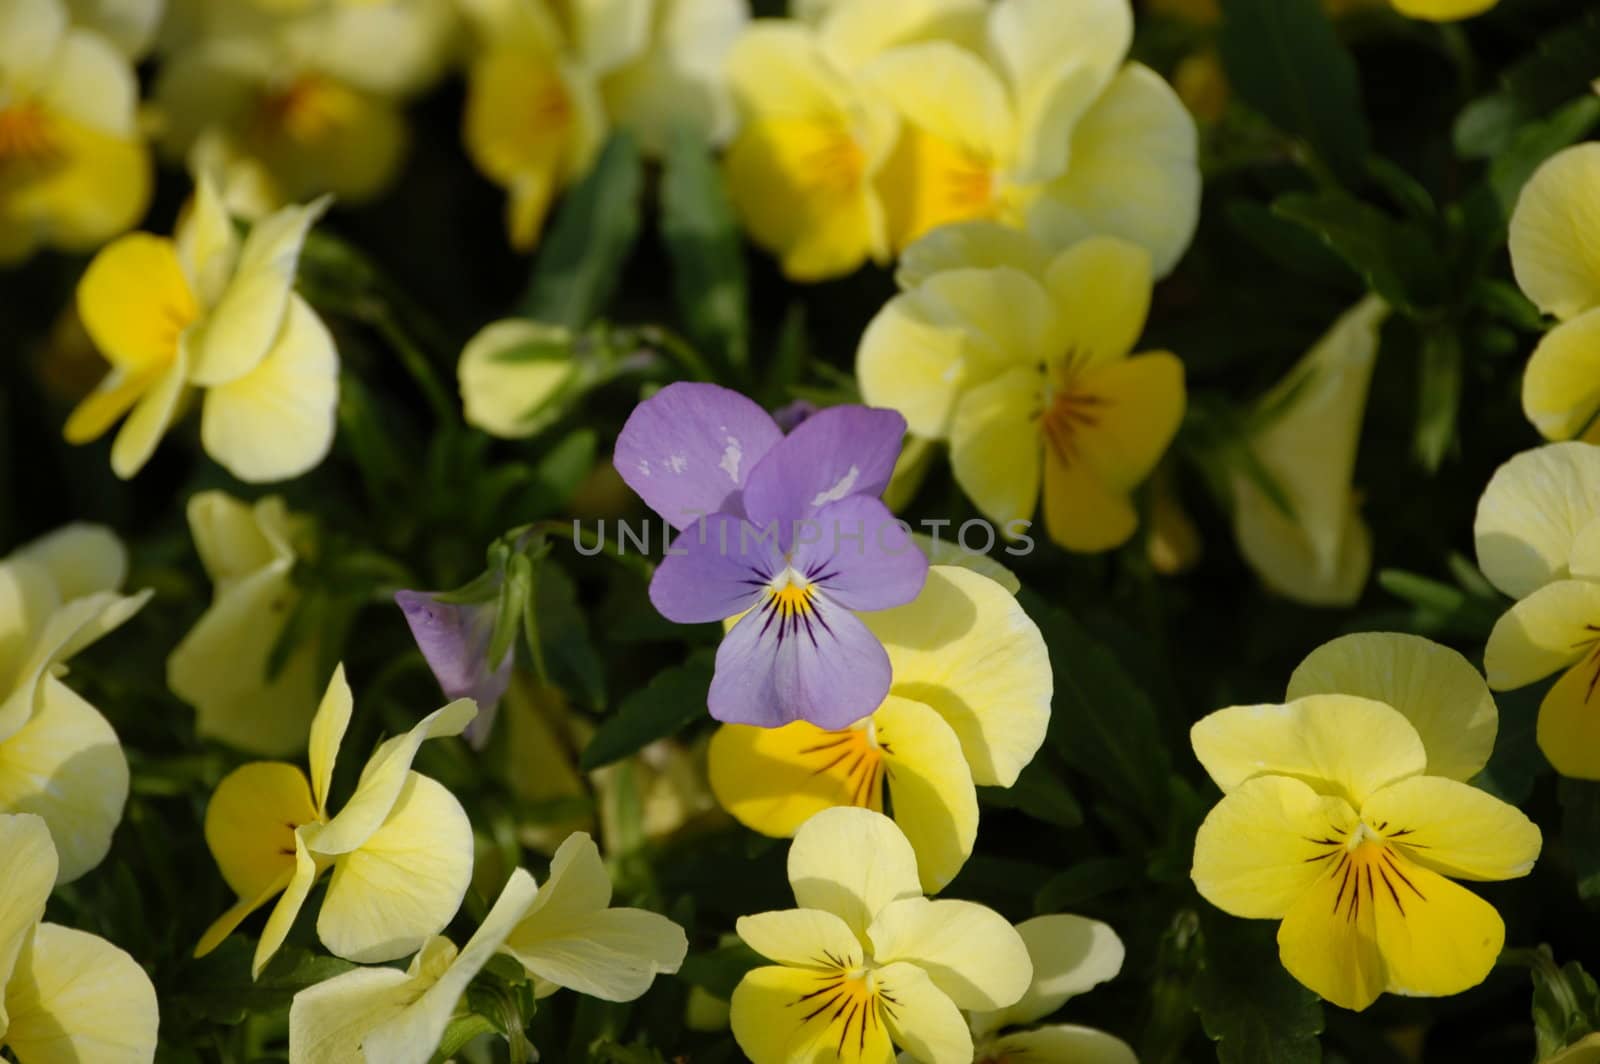 Pansies in the field by northwoodsphoto